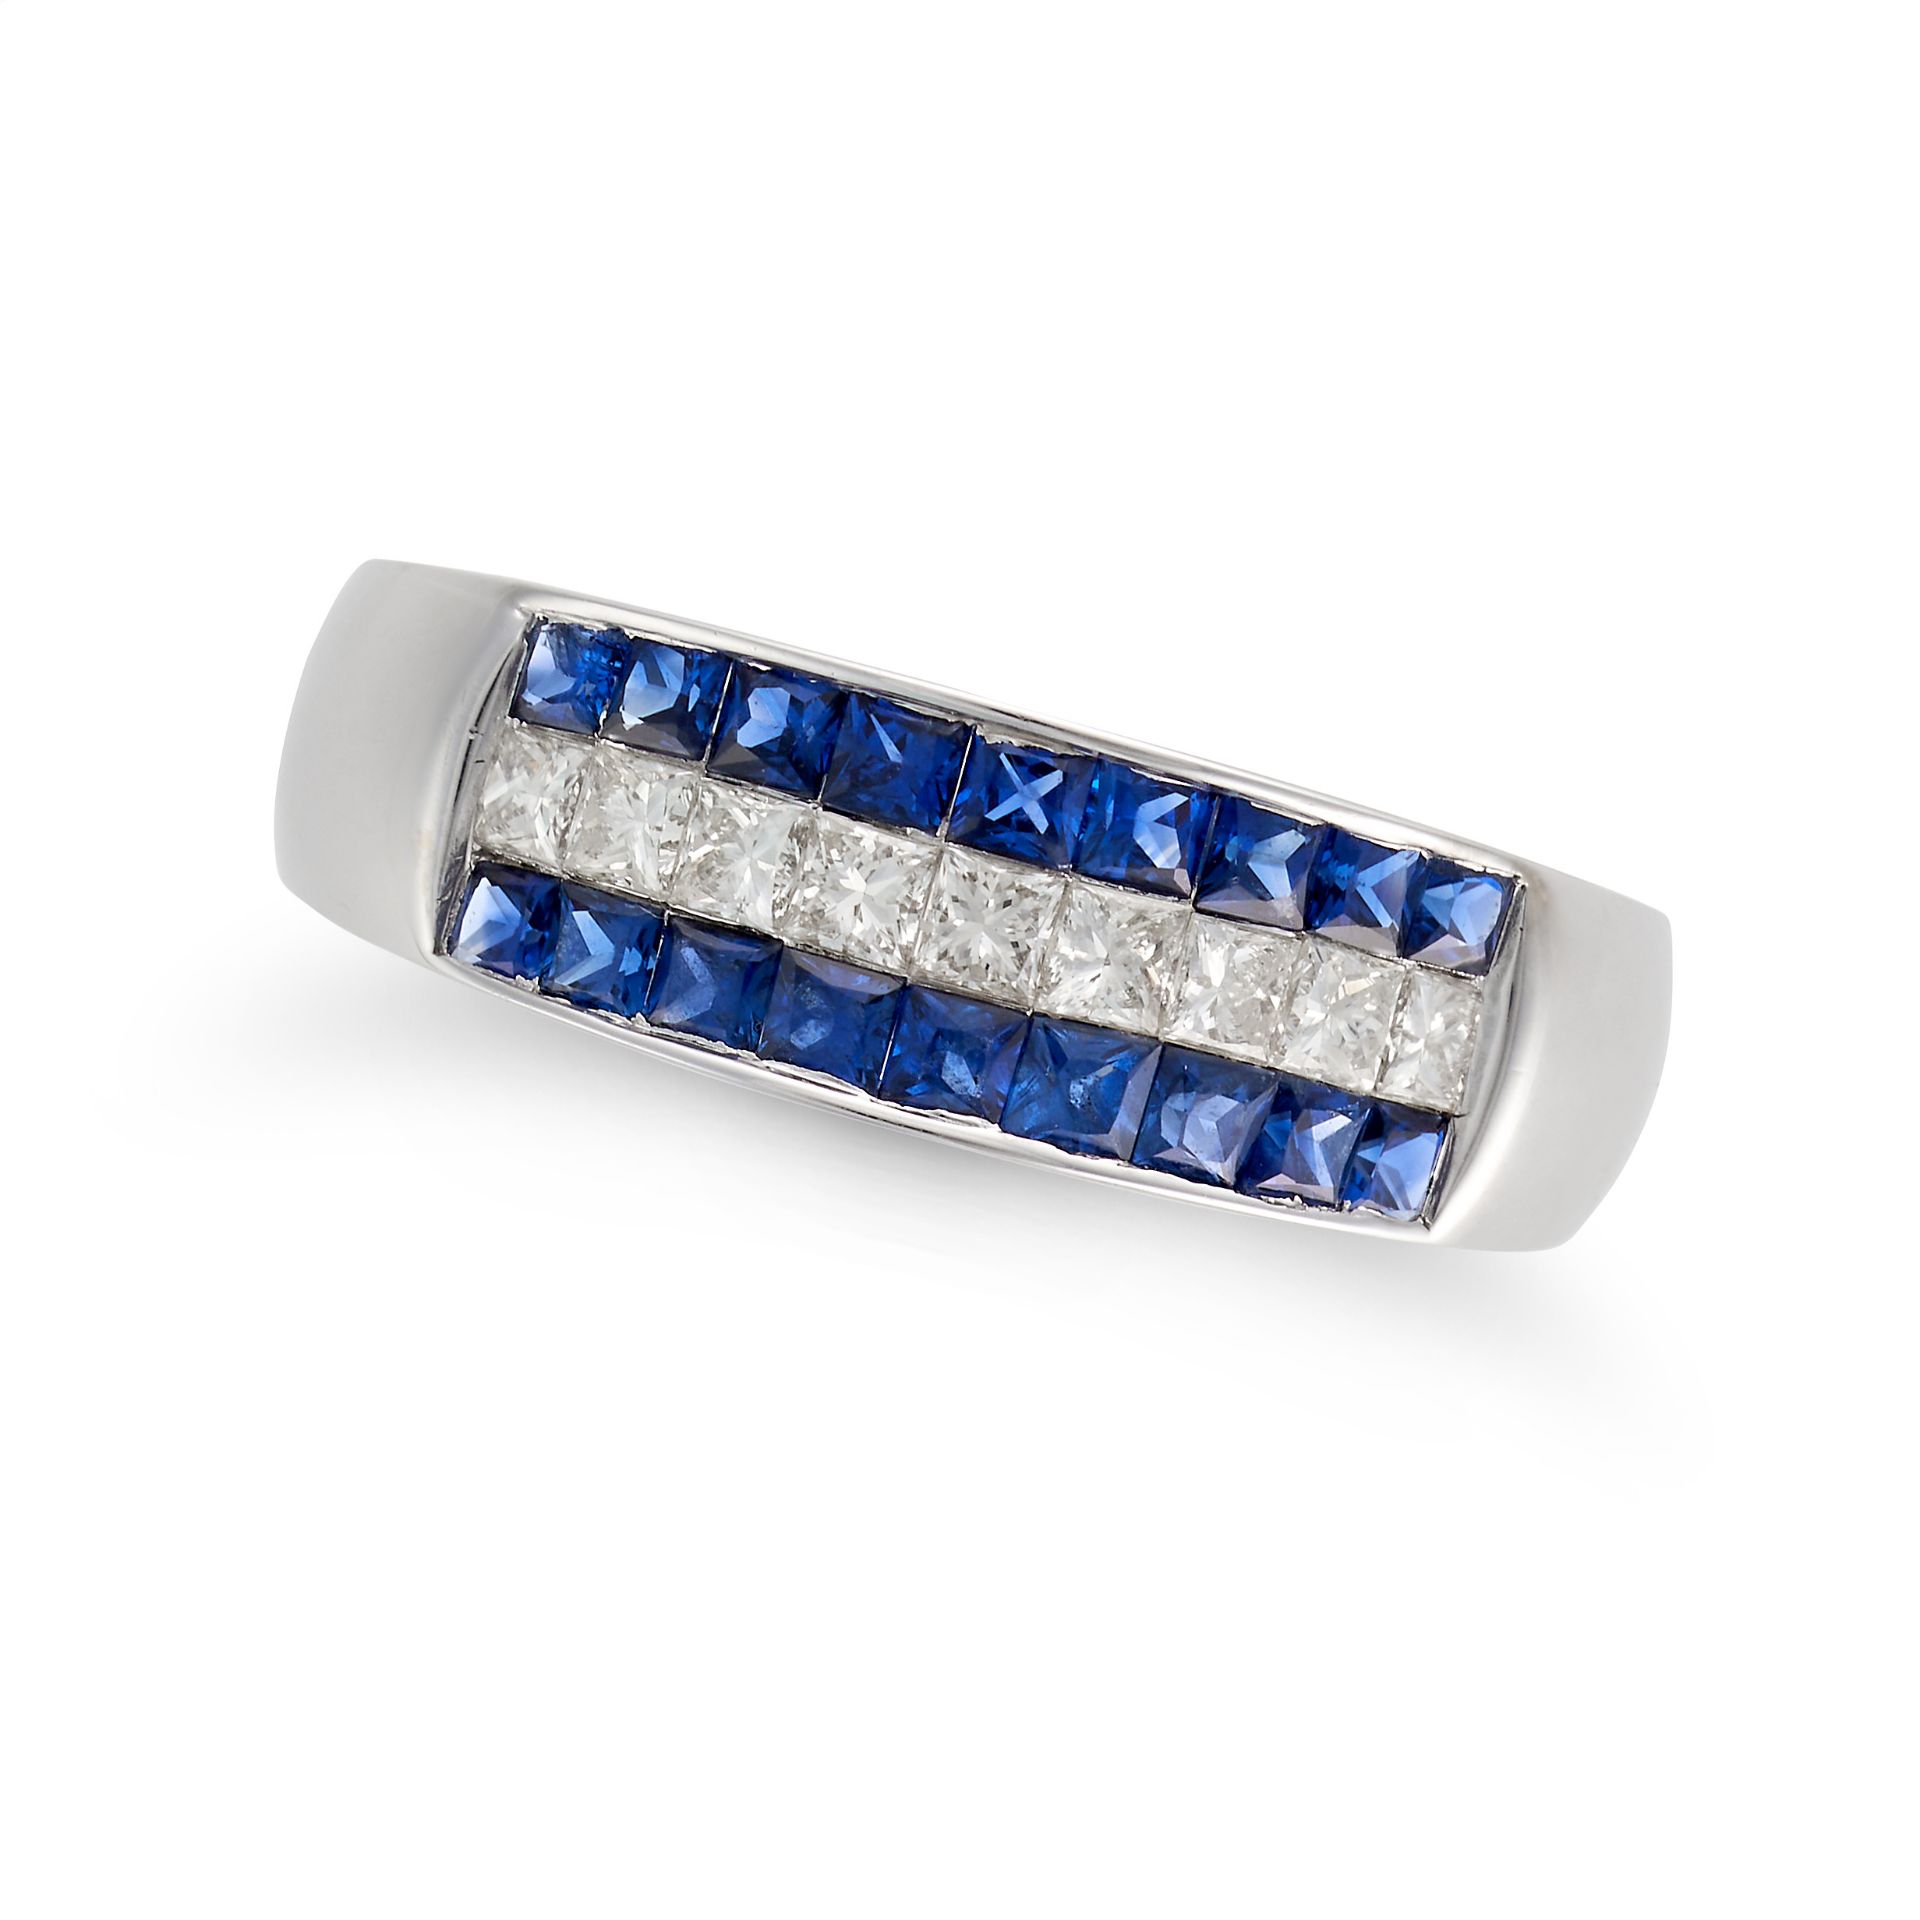 A SAPPHIRE AND DIAMOND RING set with a row of princess cut diamonds, accented by rows of square s...